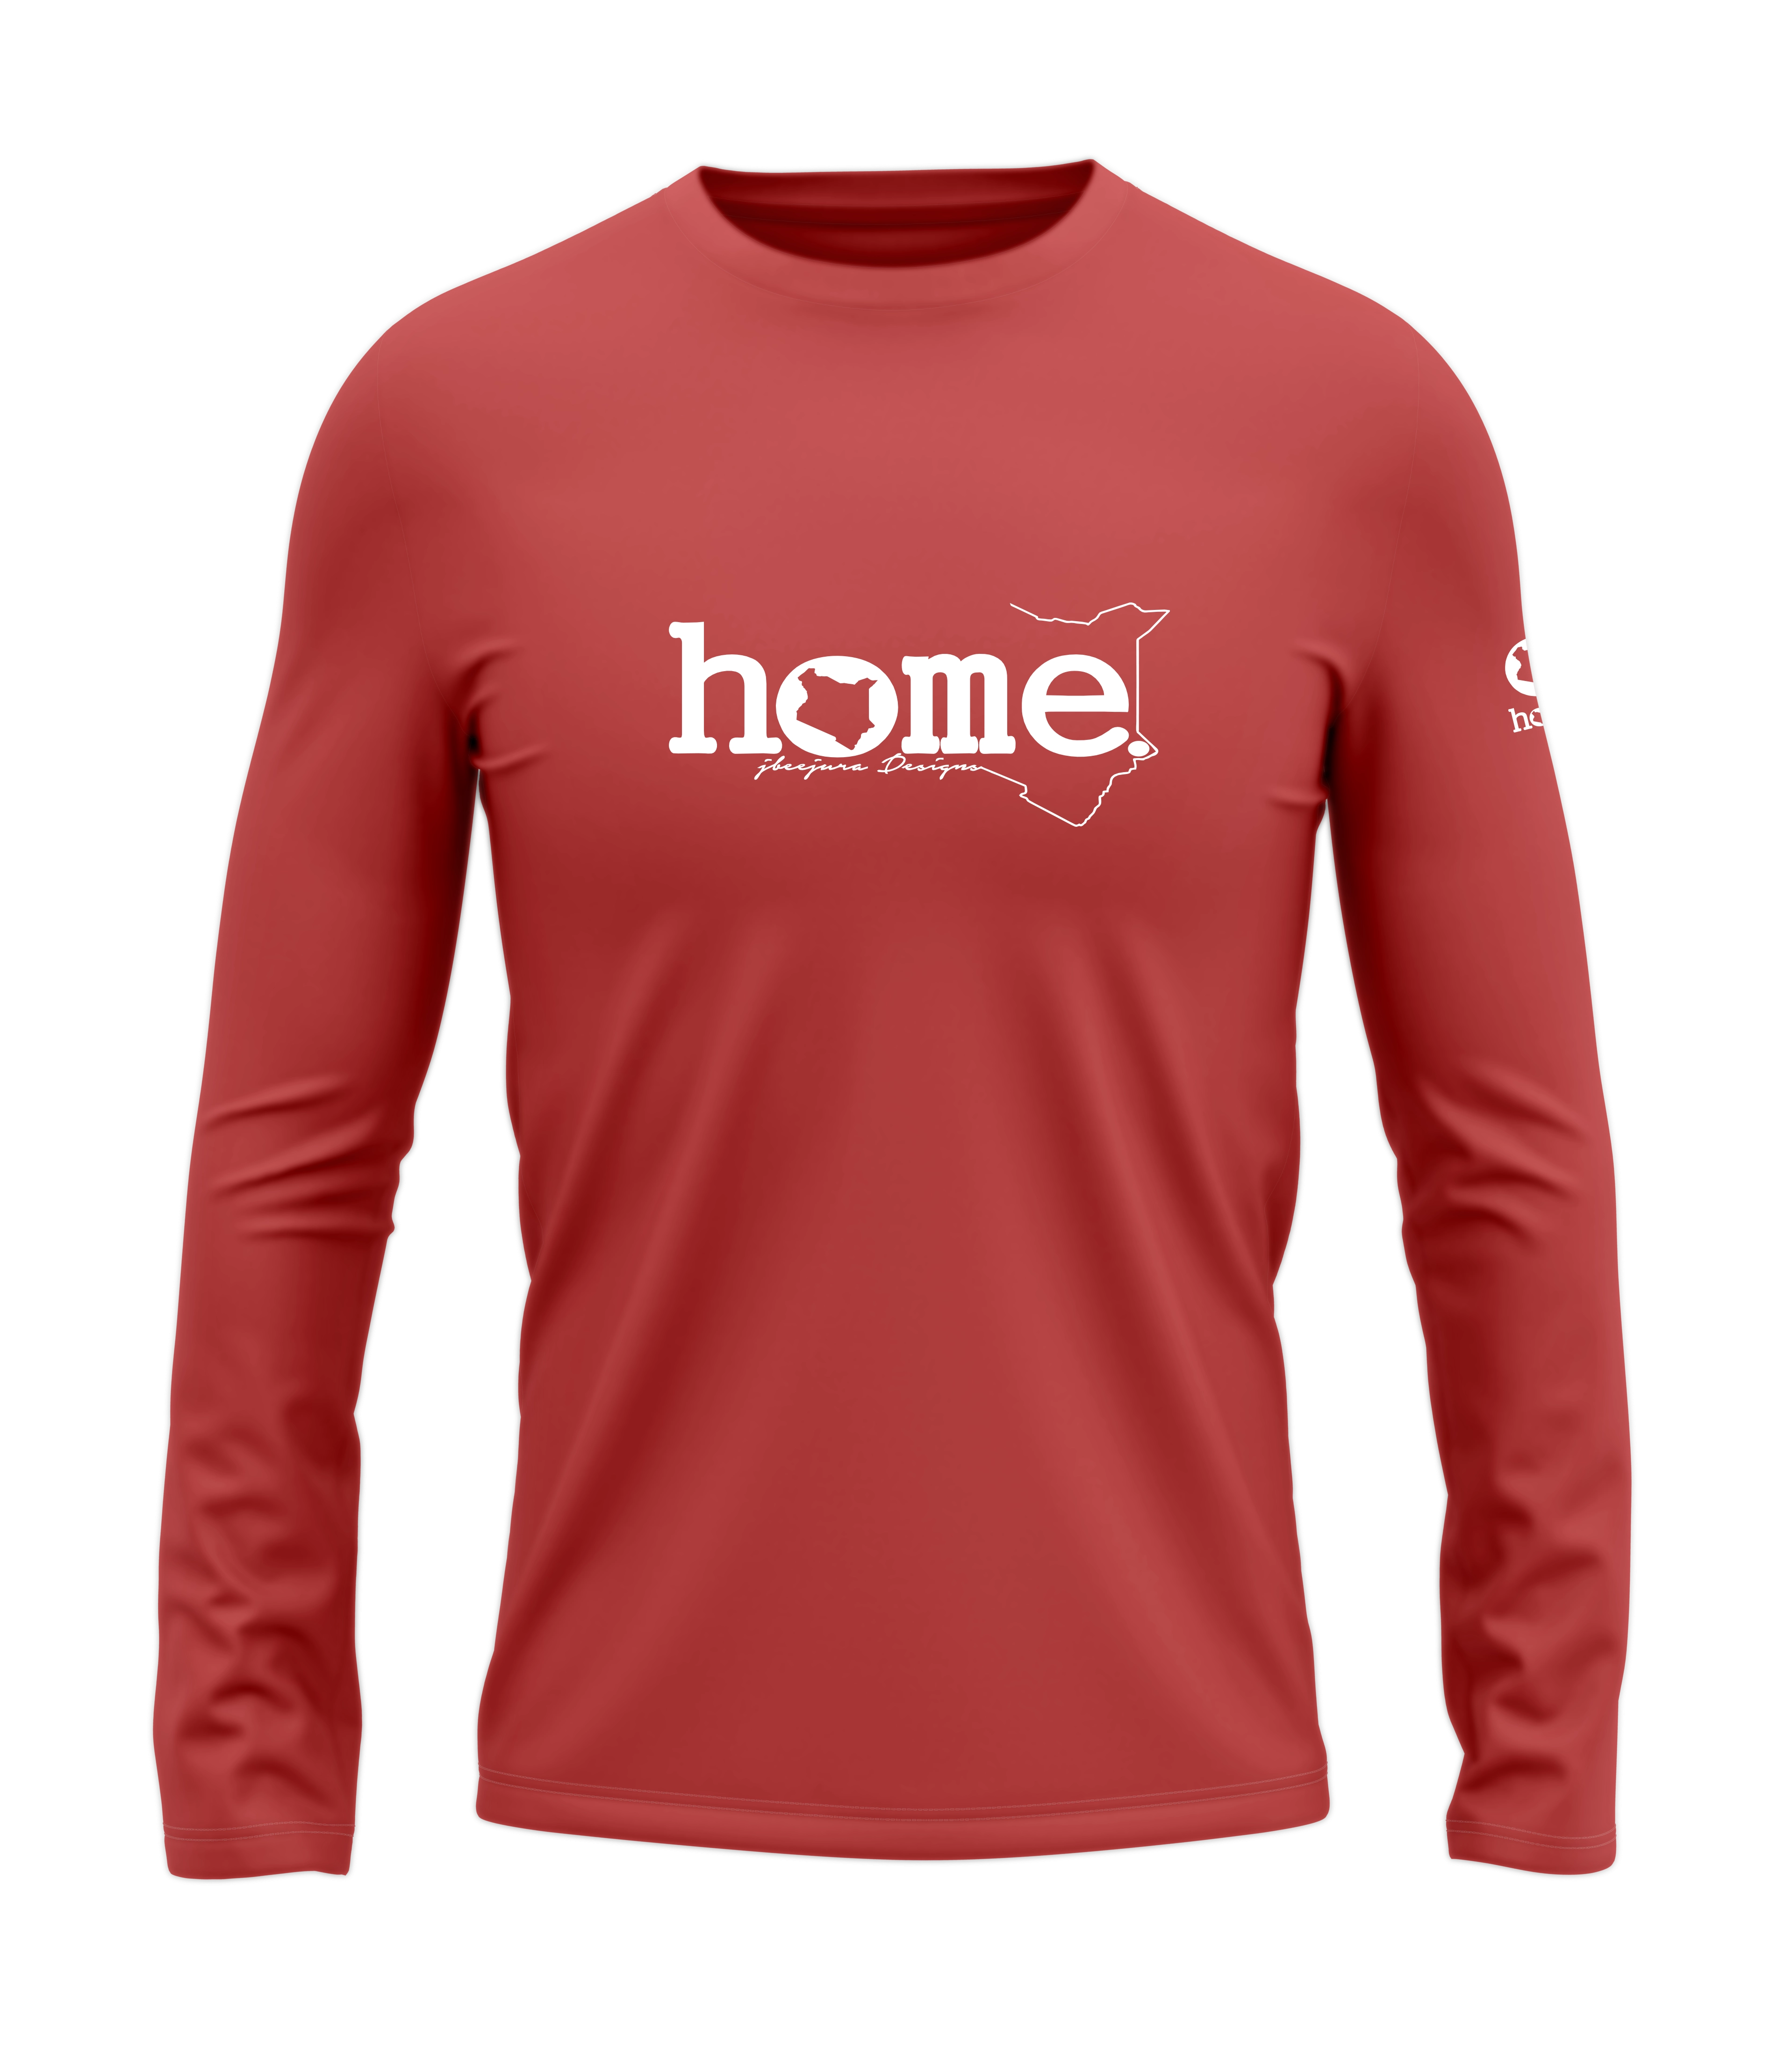 home_254 LONG-SLEEVED MULBERRY T-SHIRT WITH A WHITE CLASSIC WORDS PRINT – COTTON PLUS FABRIC